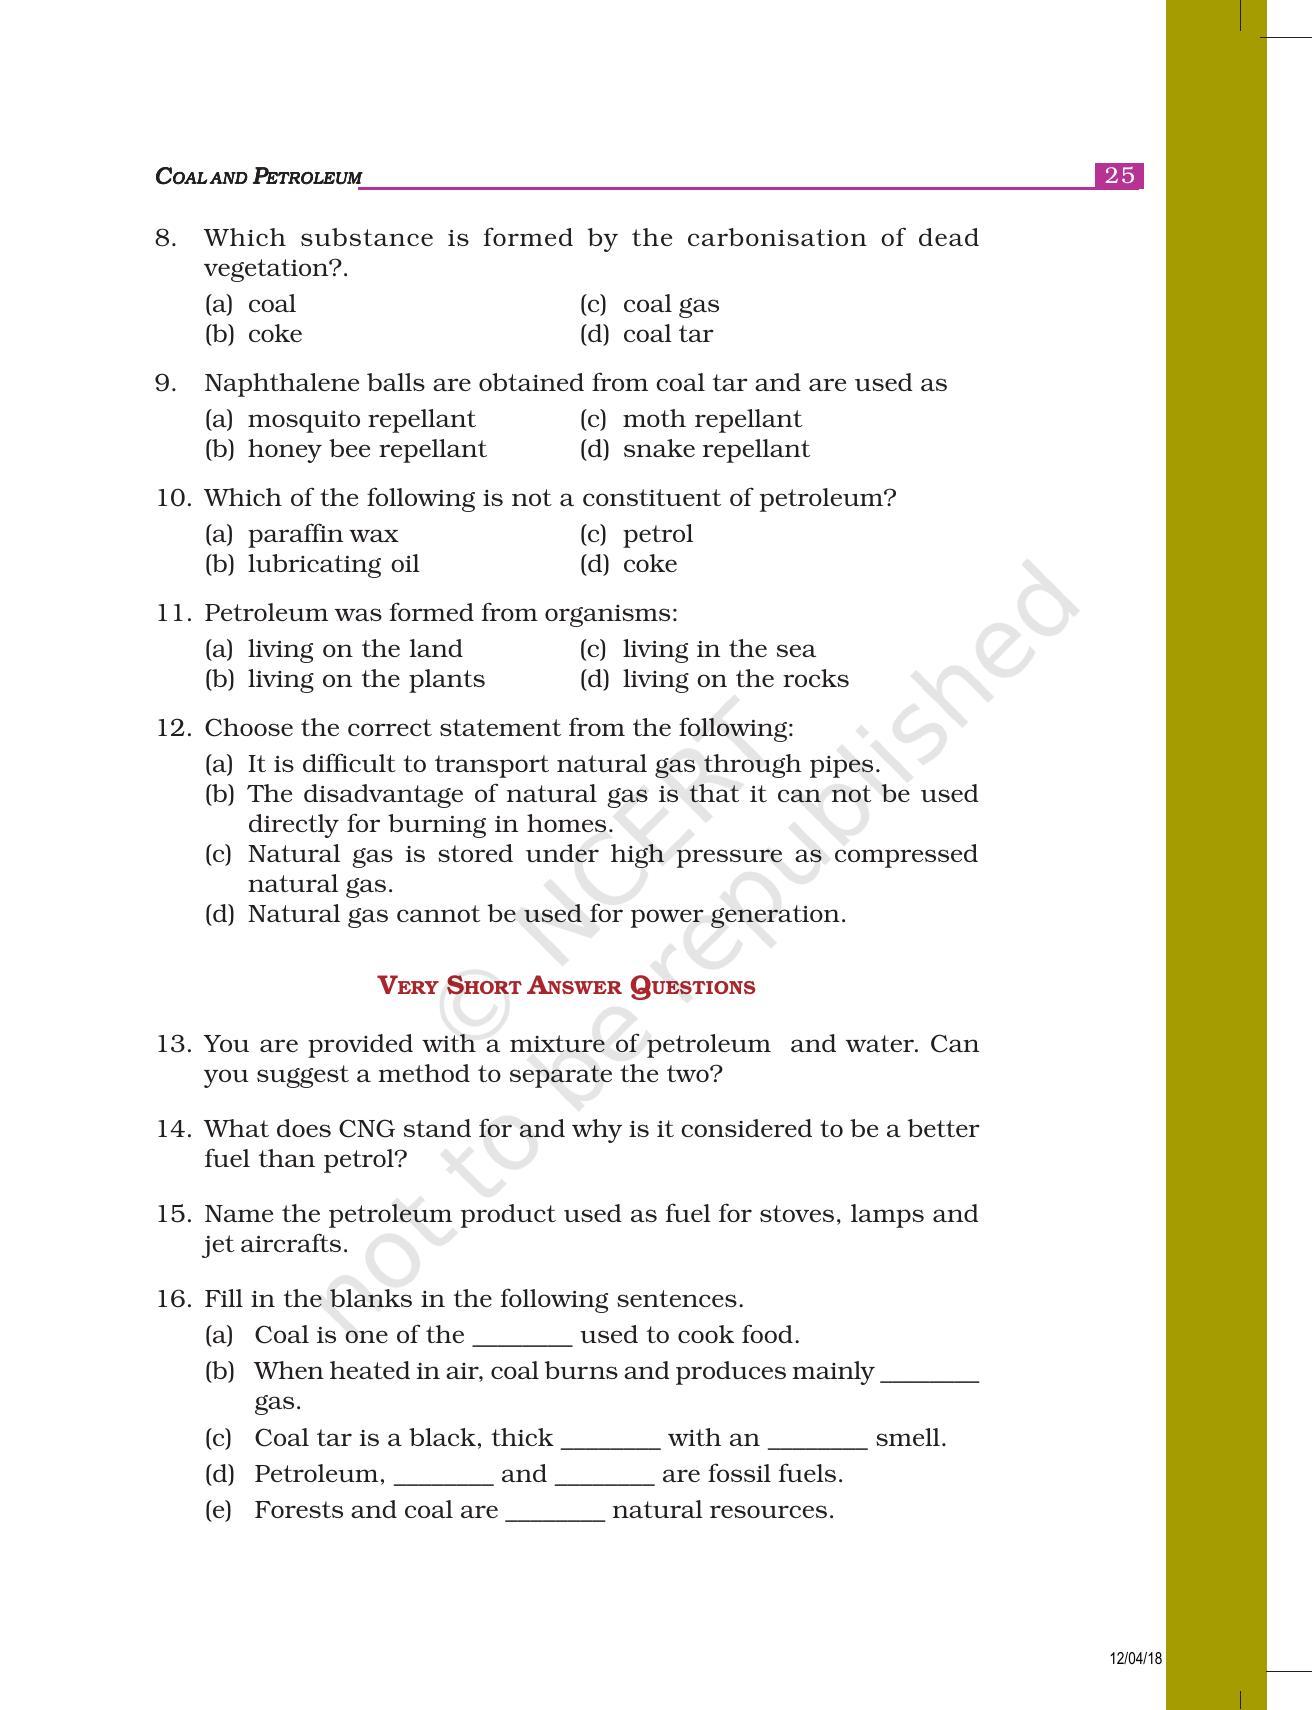 NCERT Exemplar Book for Class 8 Science: Chapter 5- Coal and Petroleum - Page 2